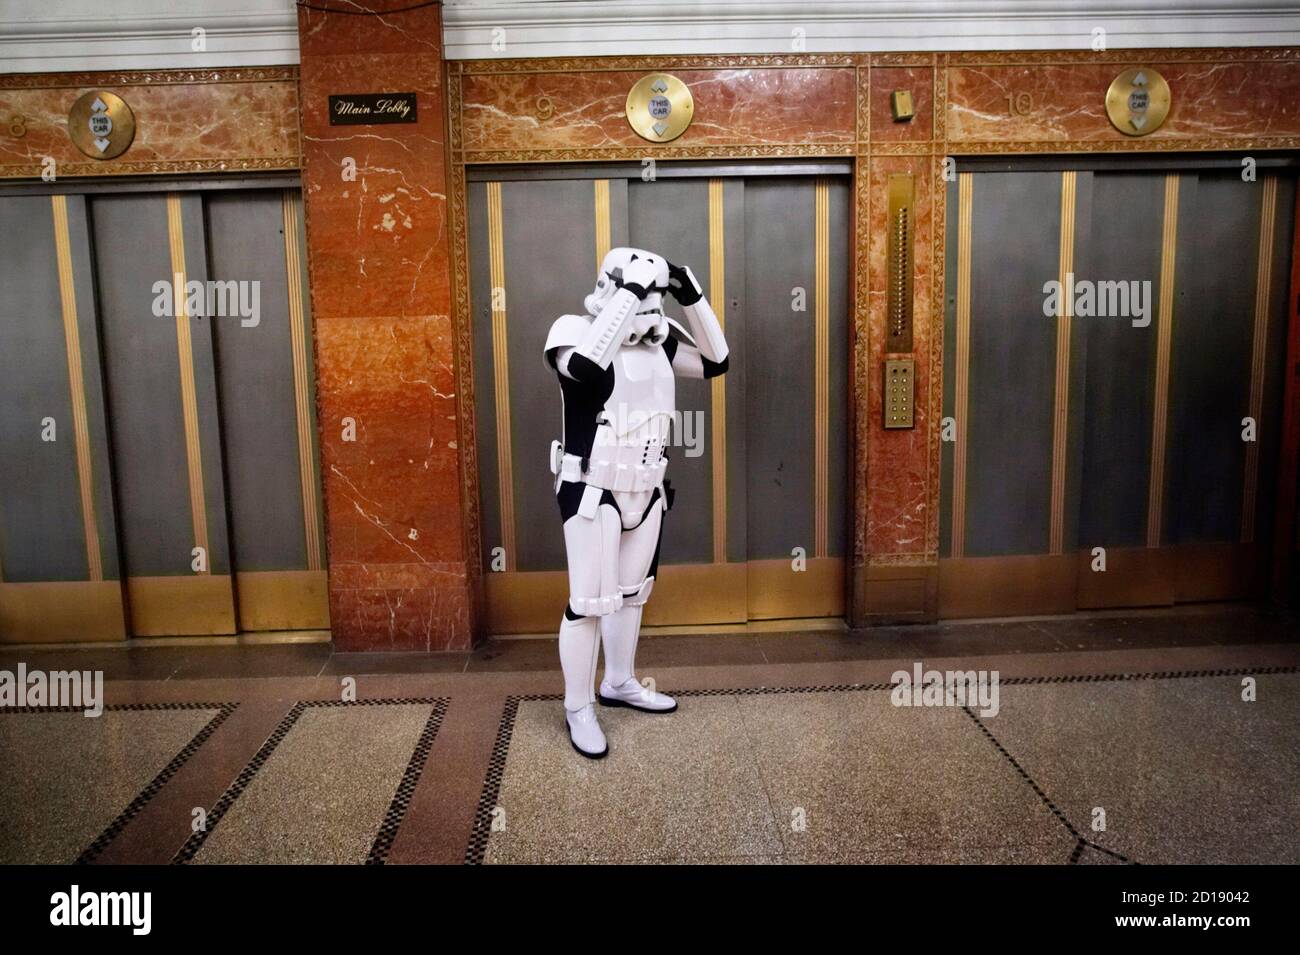 A man dressed as a character from the movie 'Star Wars' waits for an elevator in the lobby of the Hotel Pennsylvania in New York November 17, 2007. The hotel and adjacent Penn Plaza Pavillion are hosting a three day Big Apple Comic Book, Art, Toy & Sci-Fi Expo, billed as the oldest and longest running Comic, Art and Toy, Sci-Fi  show of its kind in New York.  REUTERS/Jacob Silberberg (UNITED STATES) Stock Photo